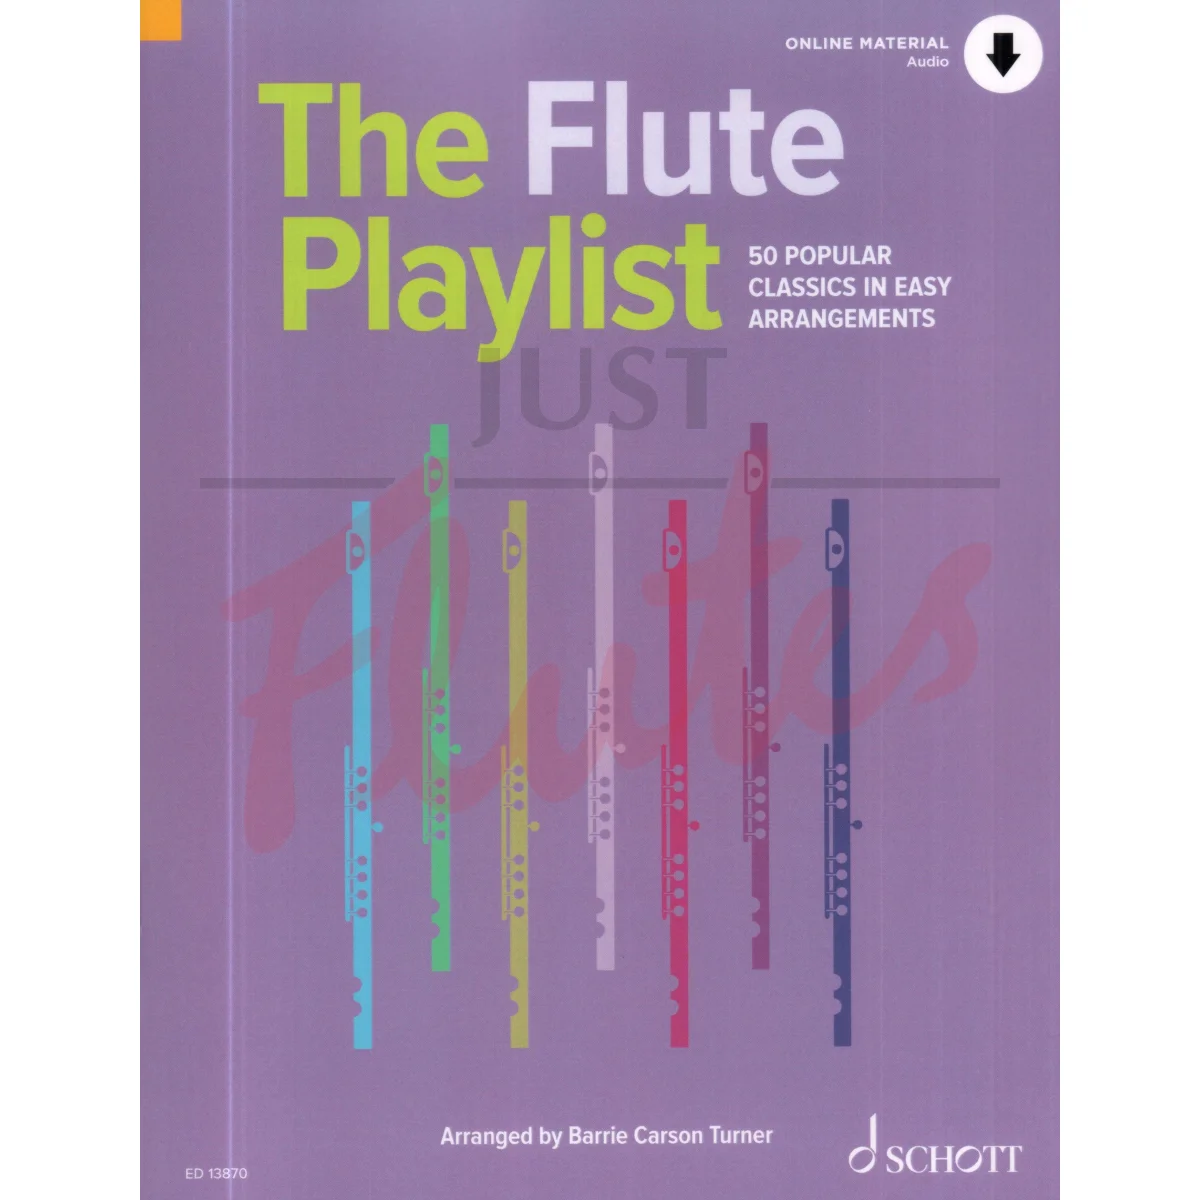 The Flute Playlist